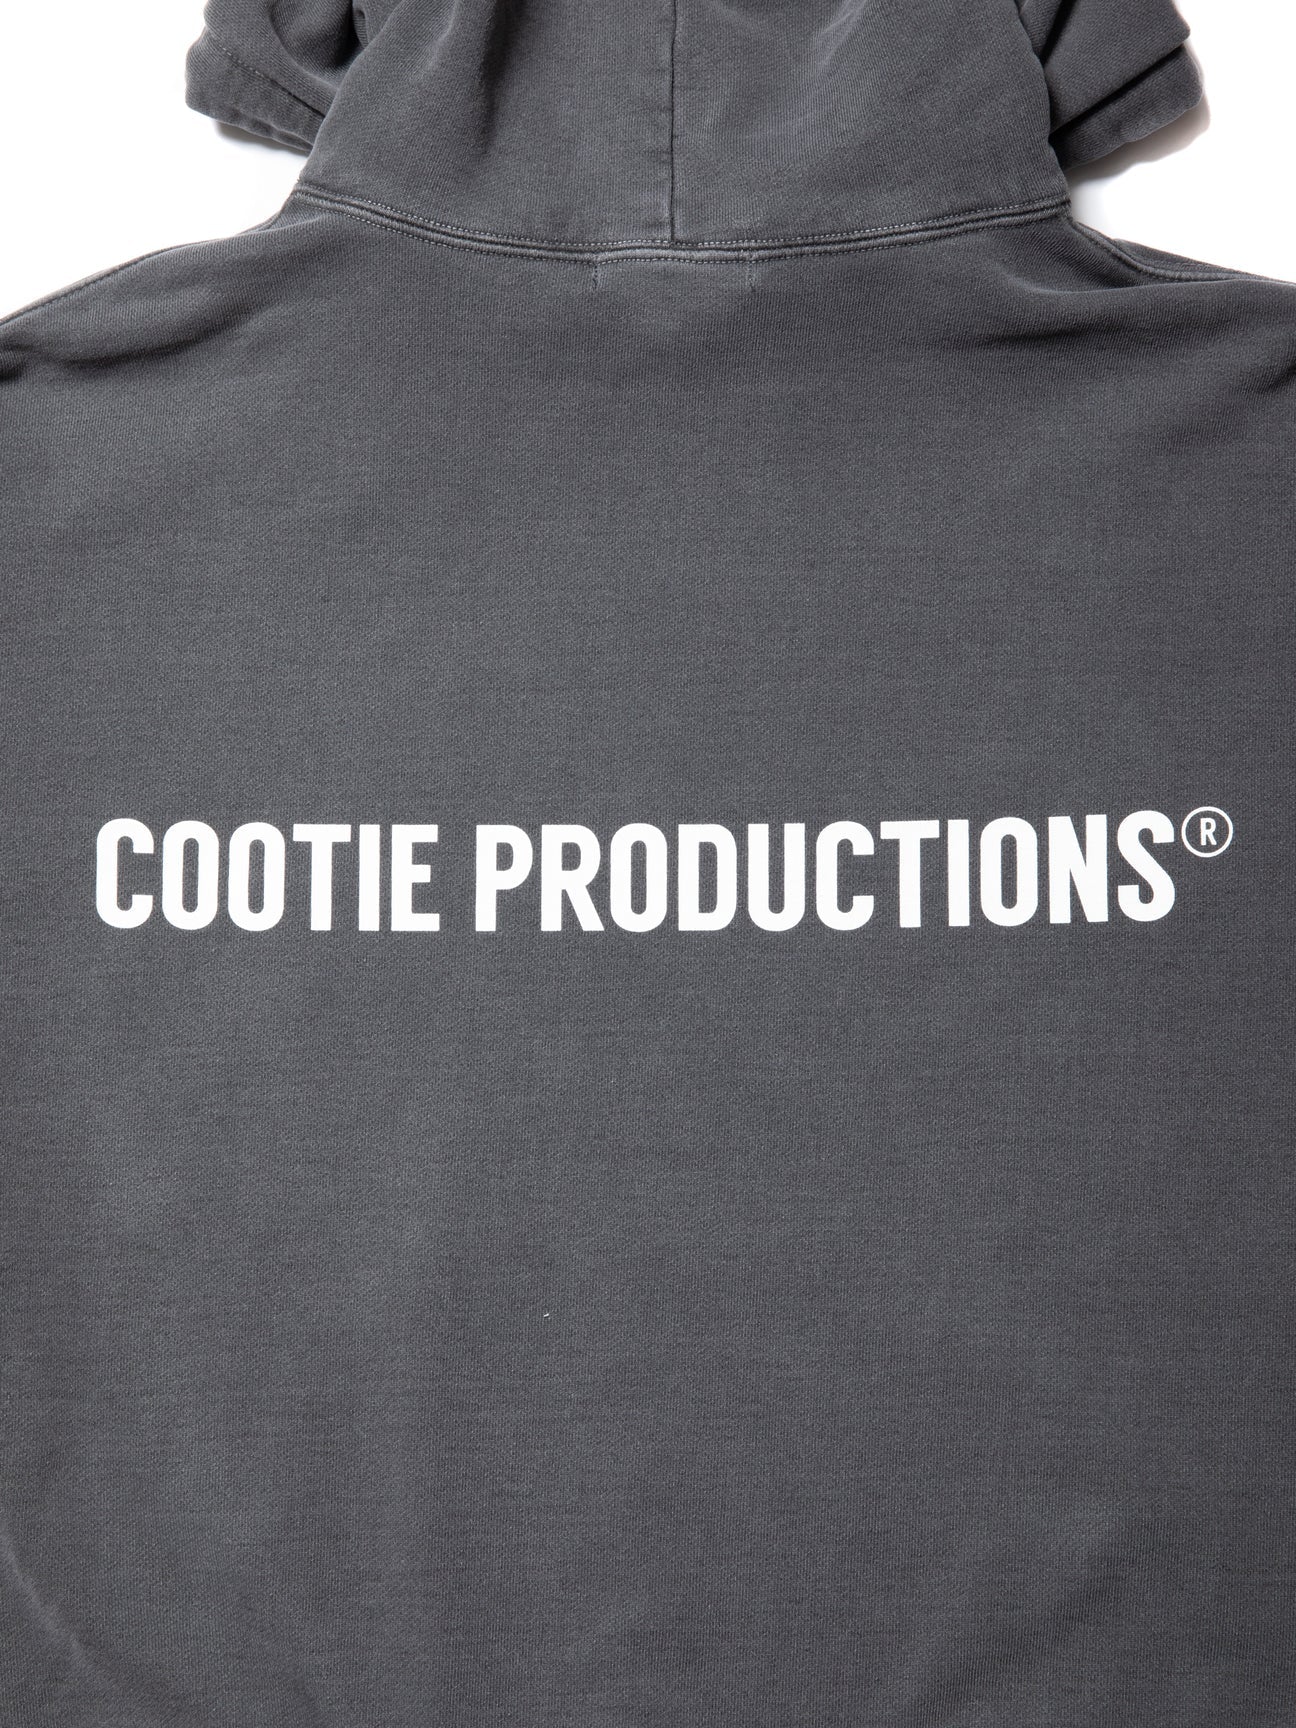 COOTIE PRODUCTIONS PIGMENT DYED OPEN END YARN SWEAT HOODIE